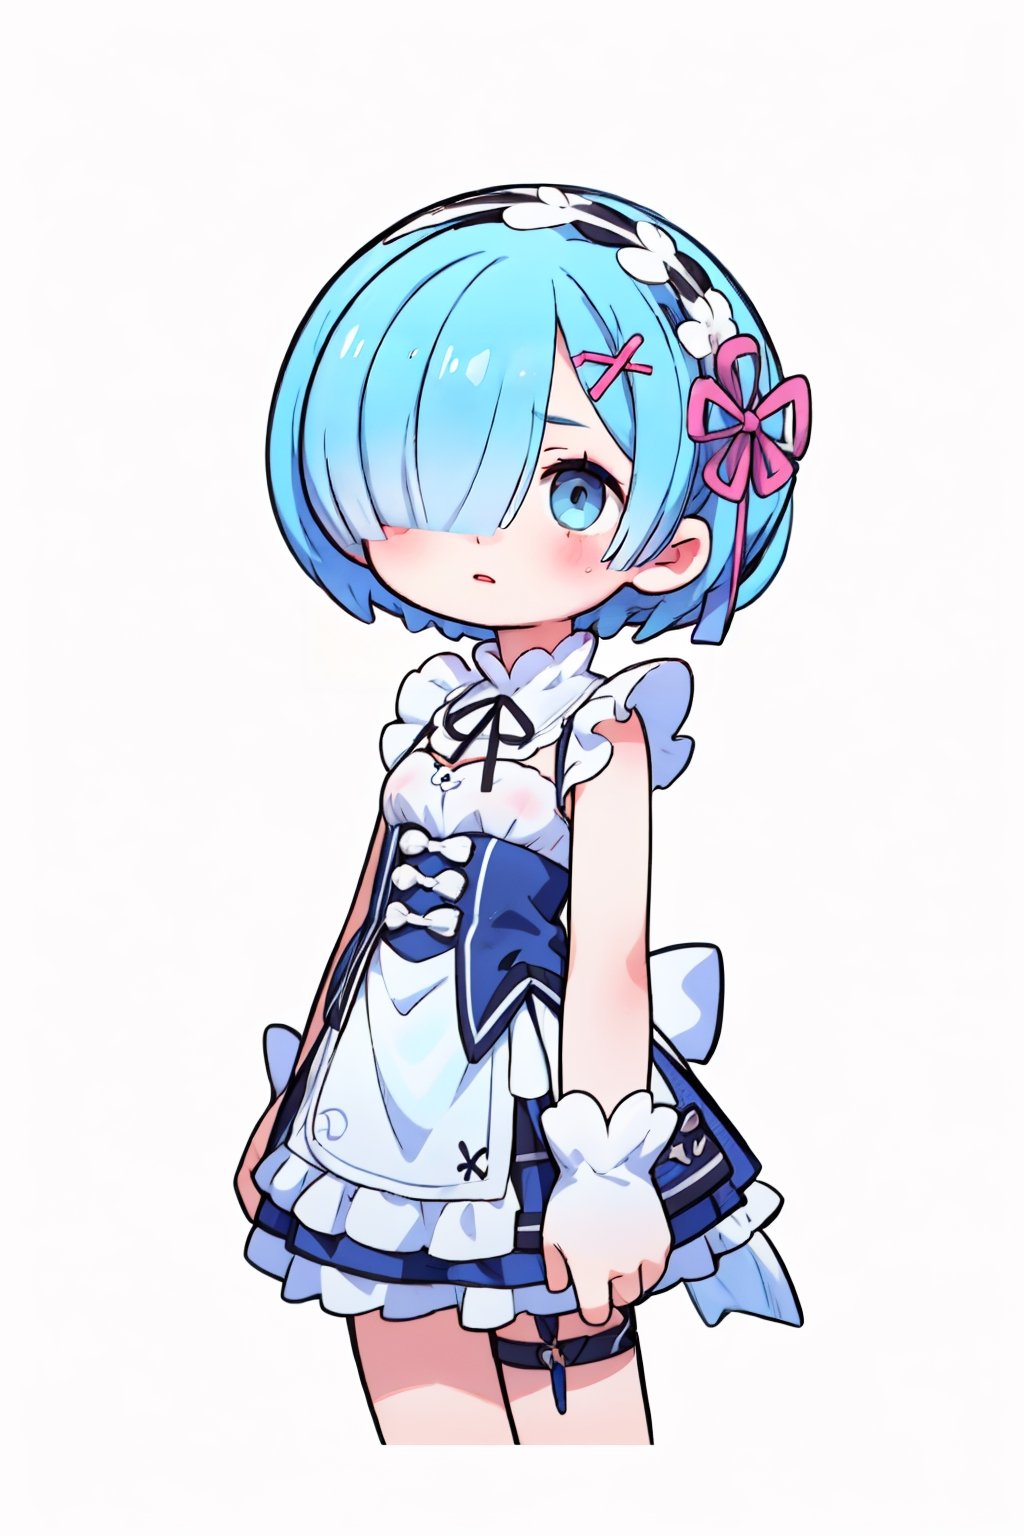 one Female,Chibi character,Educator,soft hair, short hair,Dark gray eyes,Intellectual smile, flat chest,BREAK,Simple sleeveless maid dress,simple skirt,BREAK,aausagi,She has hair clips towards the left side of her hair, a flower-shaped ribbon on the same side of her hair, and a maid hairband,rem, sky blue hair that covers her right eye